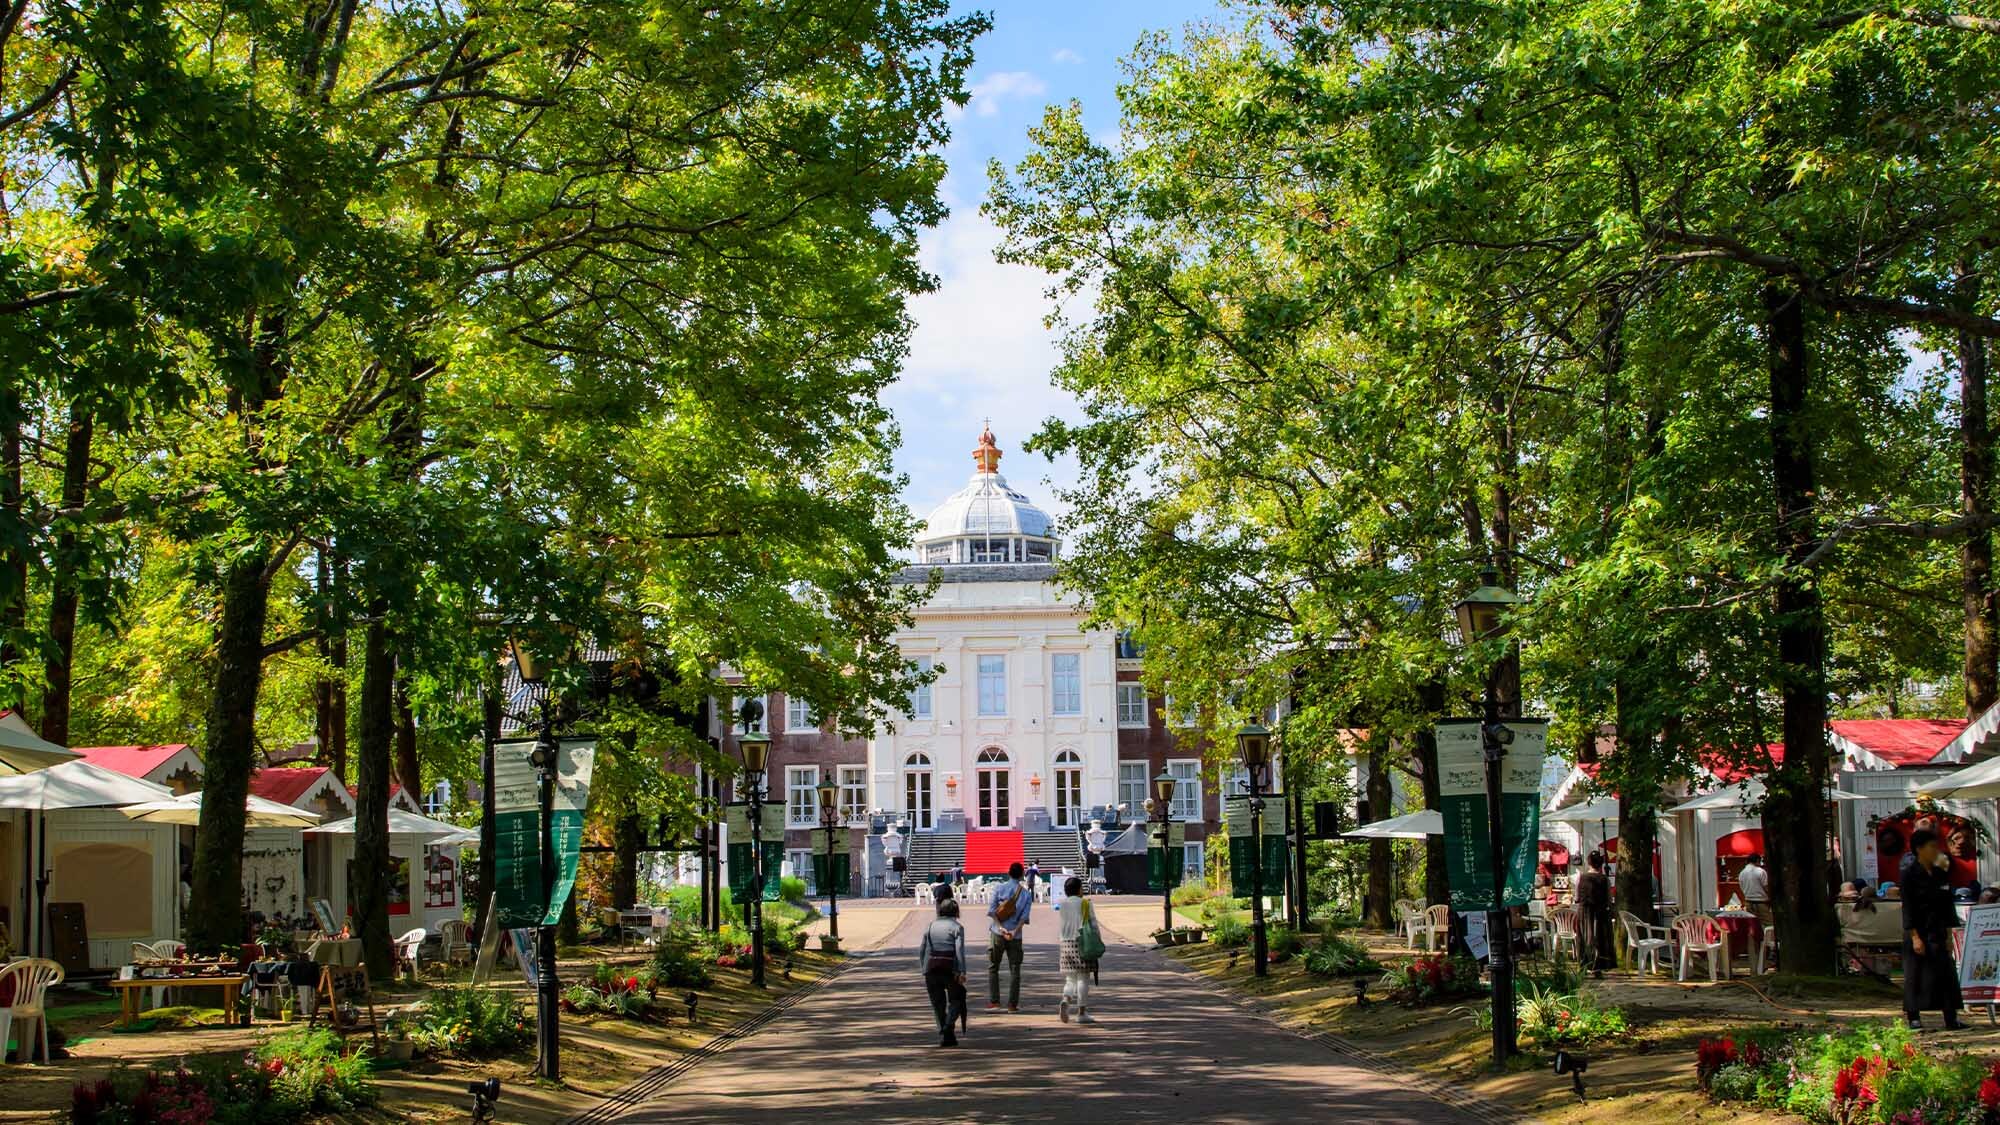 A 3-minute walk to "Palace Huis Ten Bosch", the tree-lined road changes depending on the season